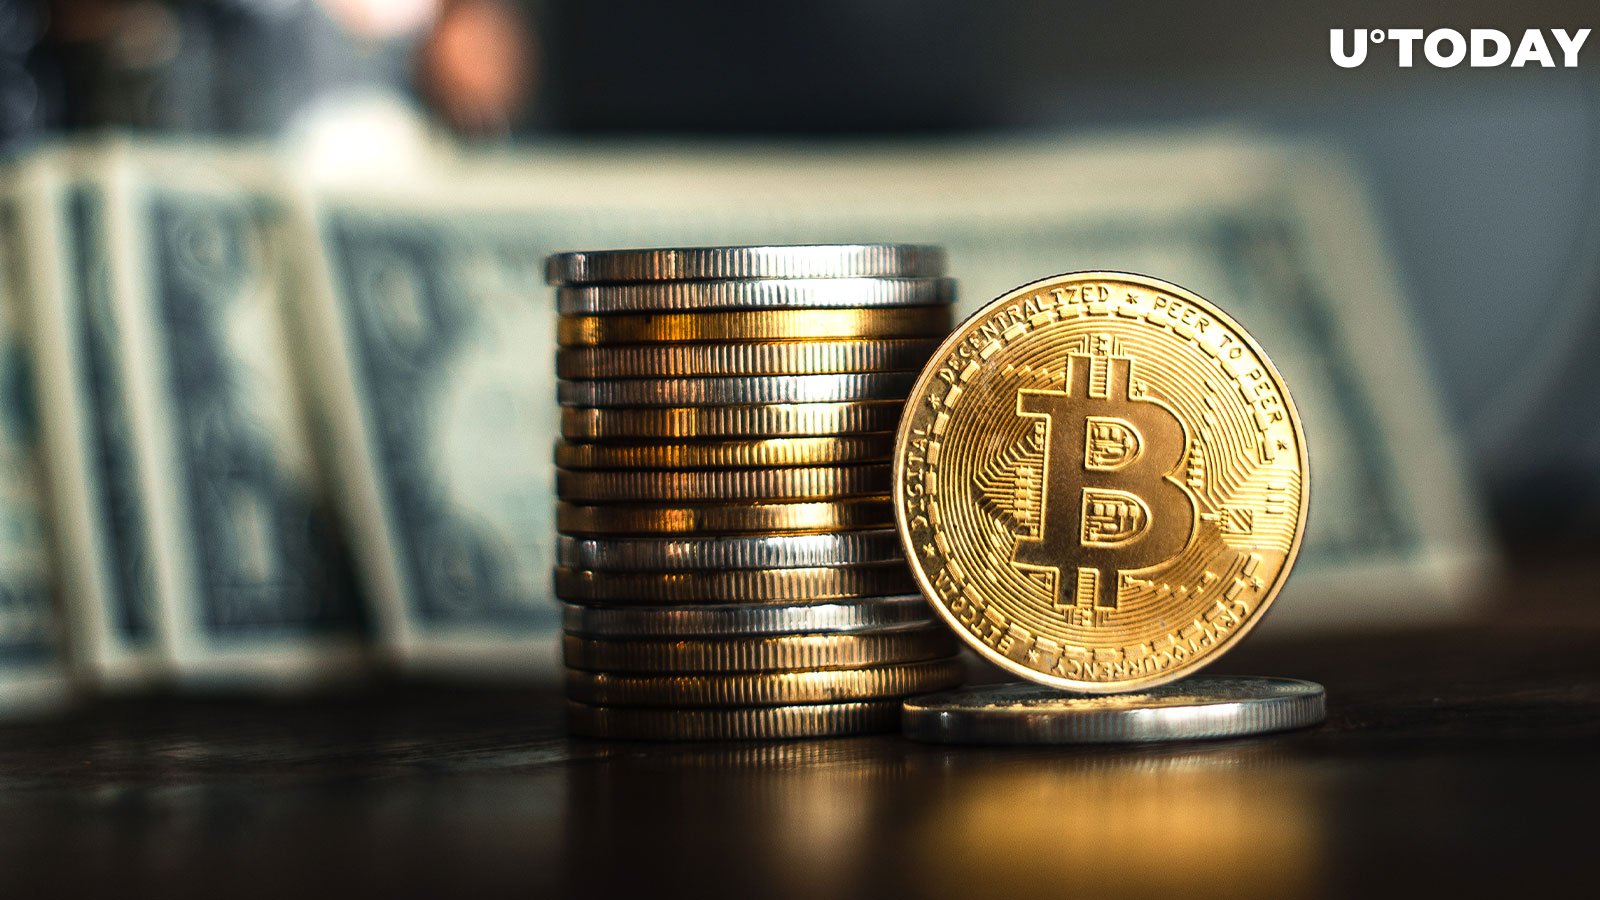 Bitcoin Sees Significant Profit-Taking by Short-Term Holders